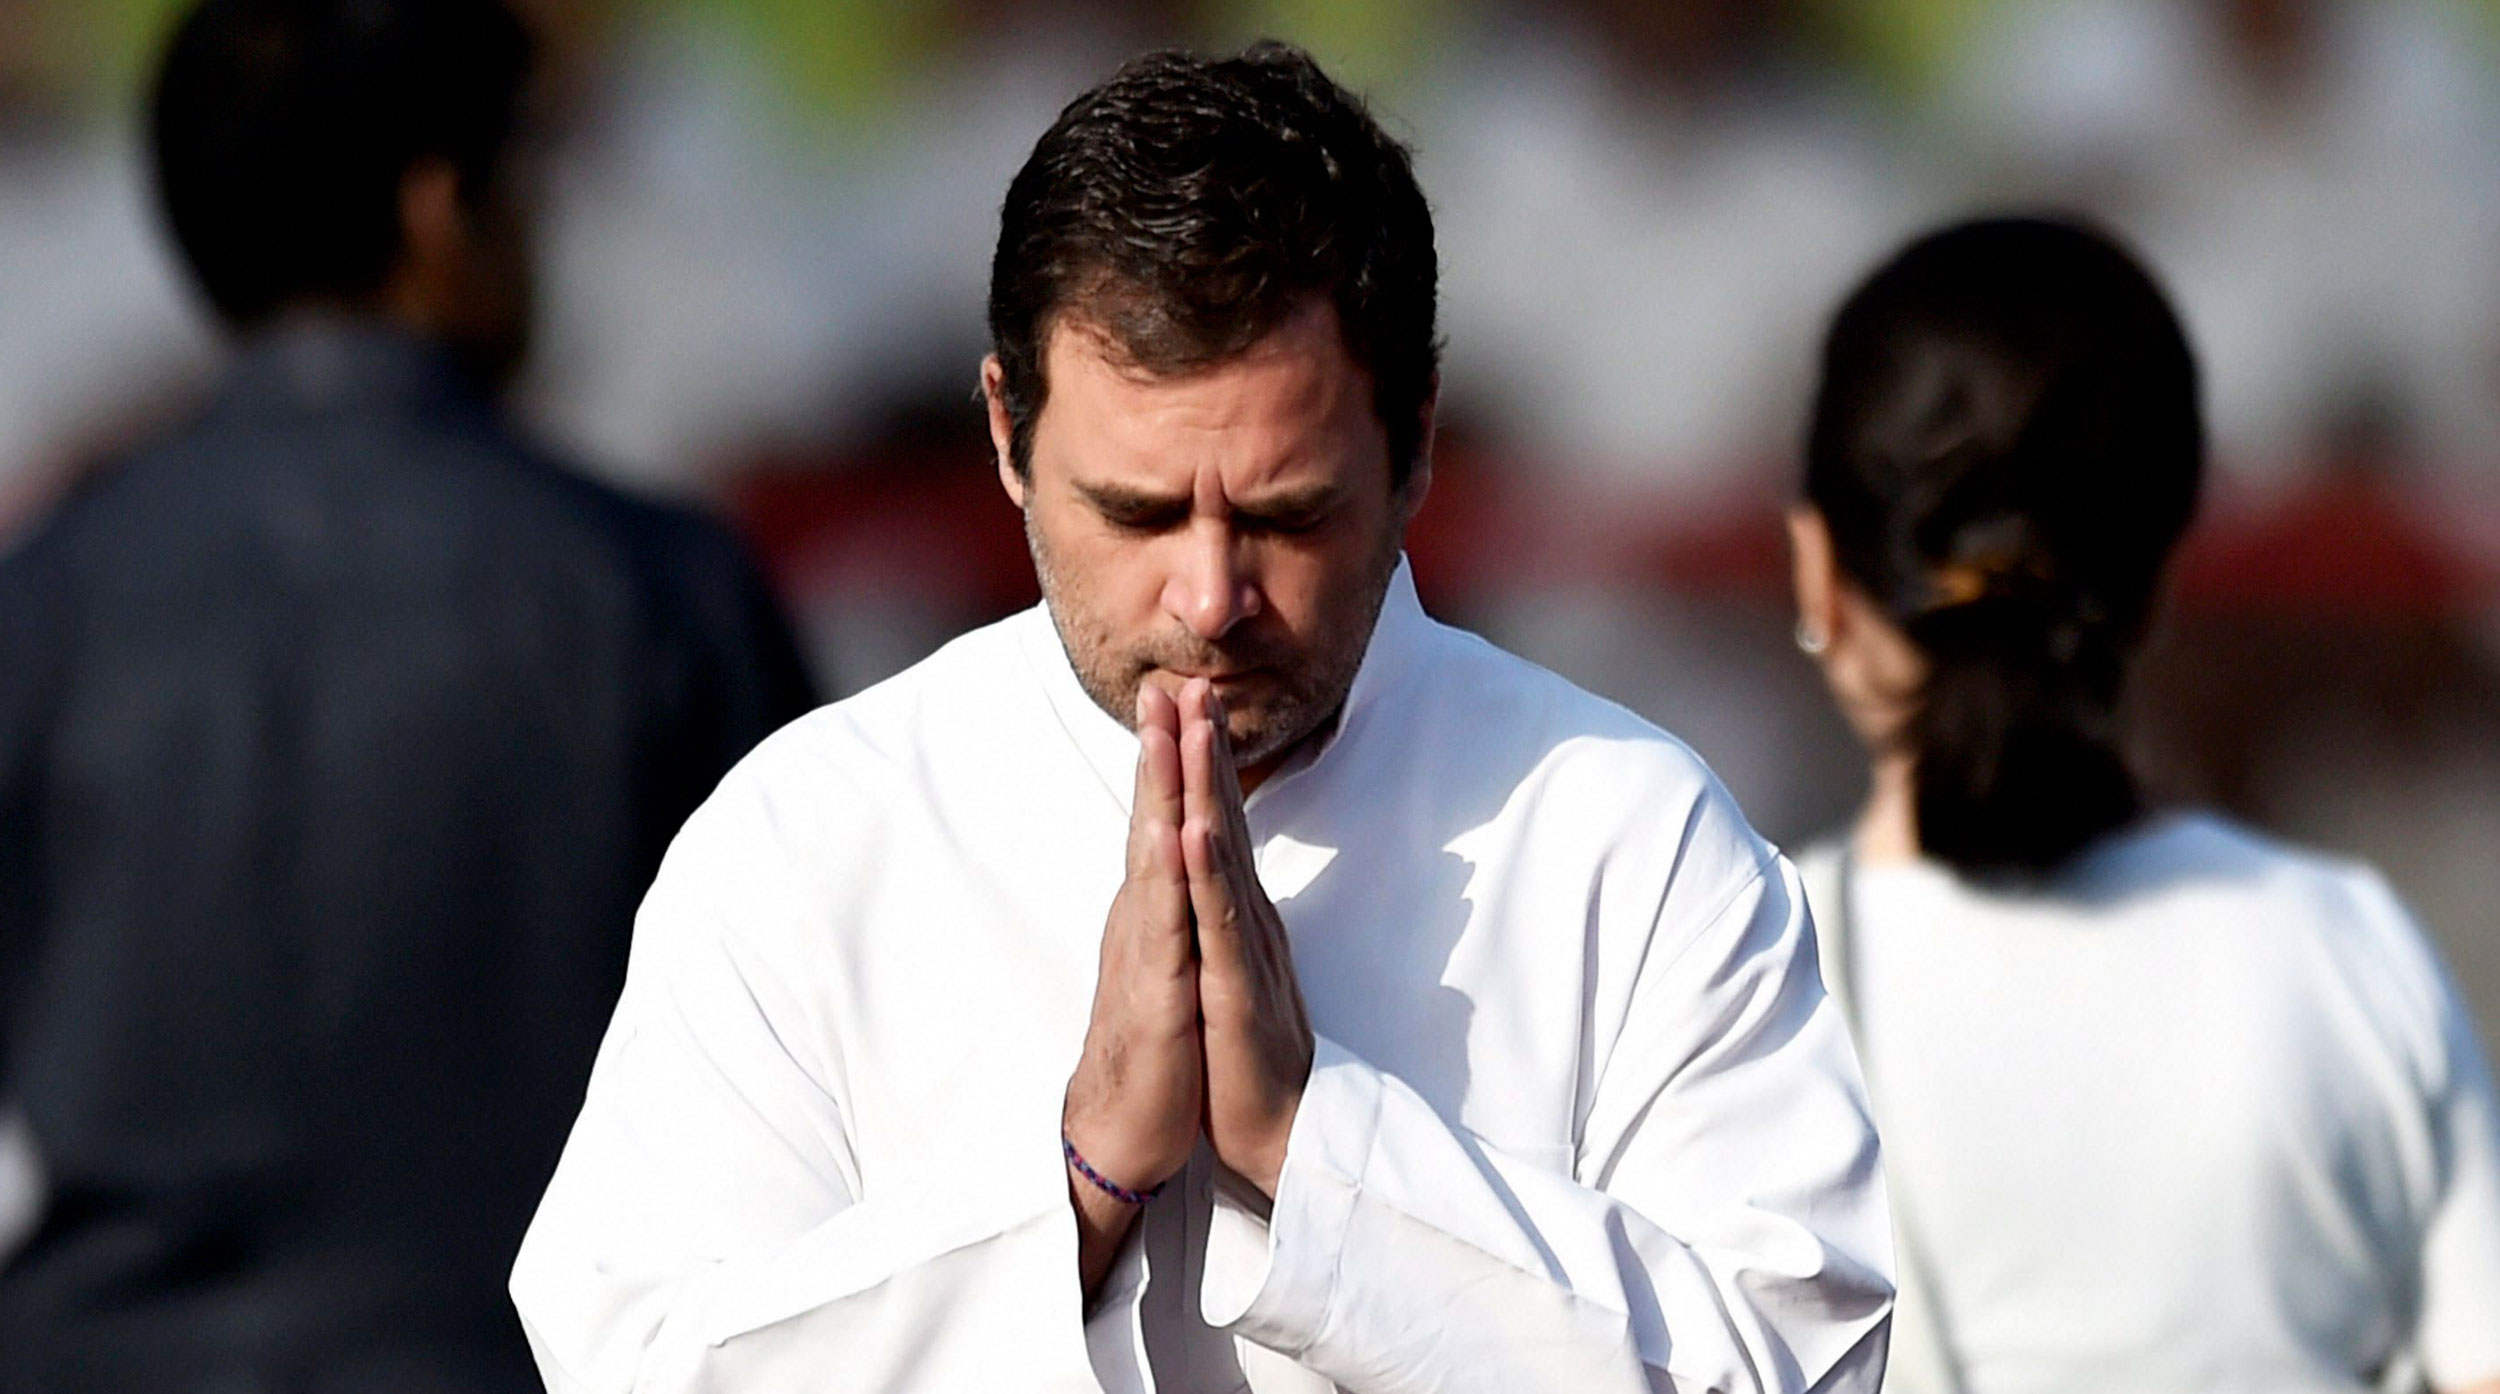 Rahul Gandhi pays tribute to Jawaharlal Nehru on his 55th death anniversary, at Shanti Vana in New Delhi on May 27, 2019. The Congress gained its ground from the national movement, with the majority of its supporters rooting for the charismatic leadership of Jawaharlal Nehru and Indira Gandhi